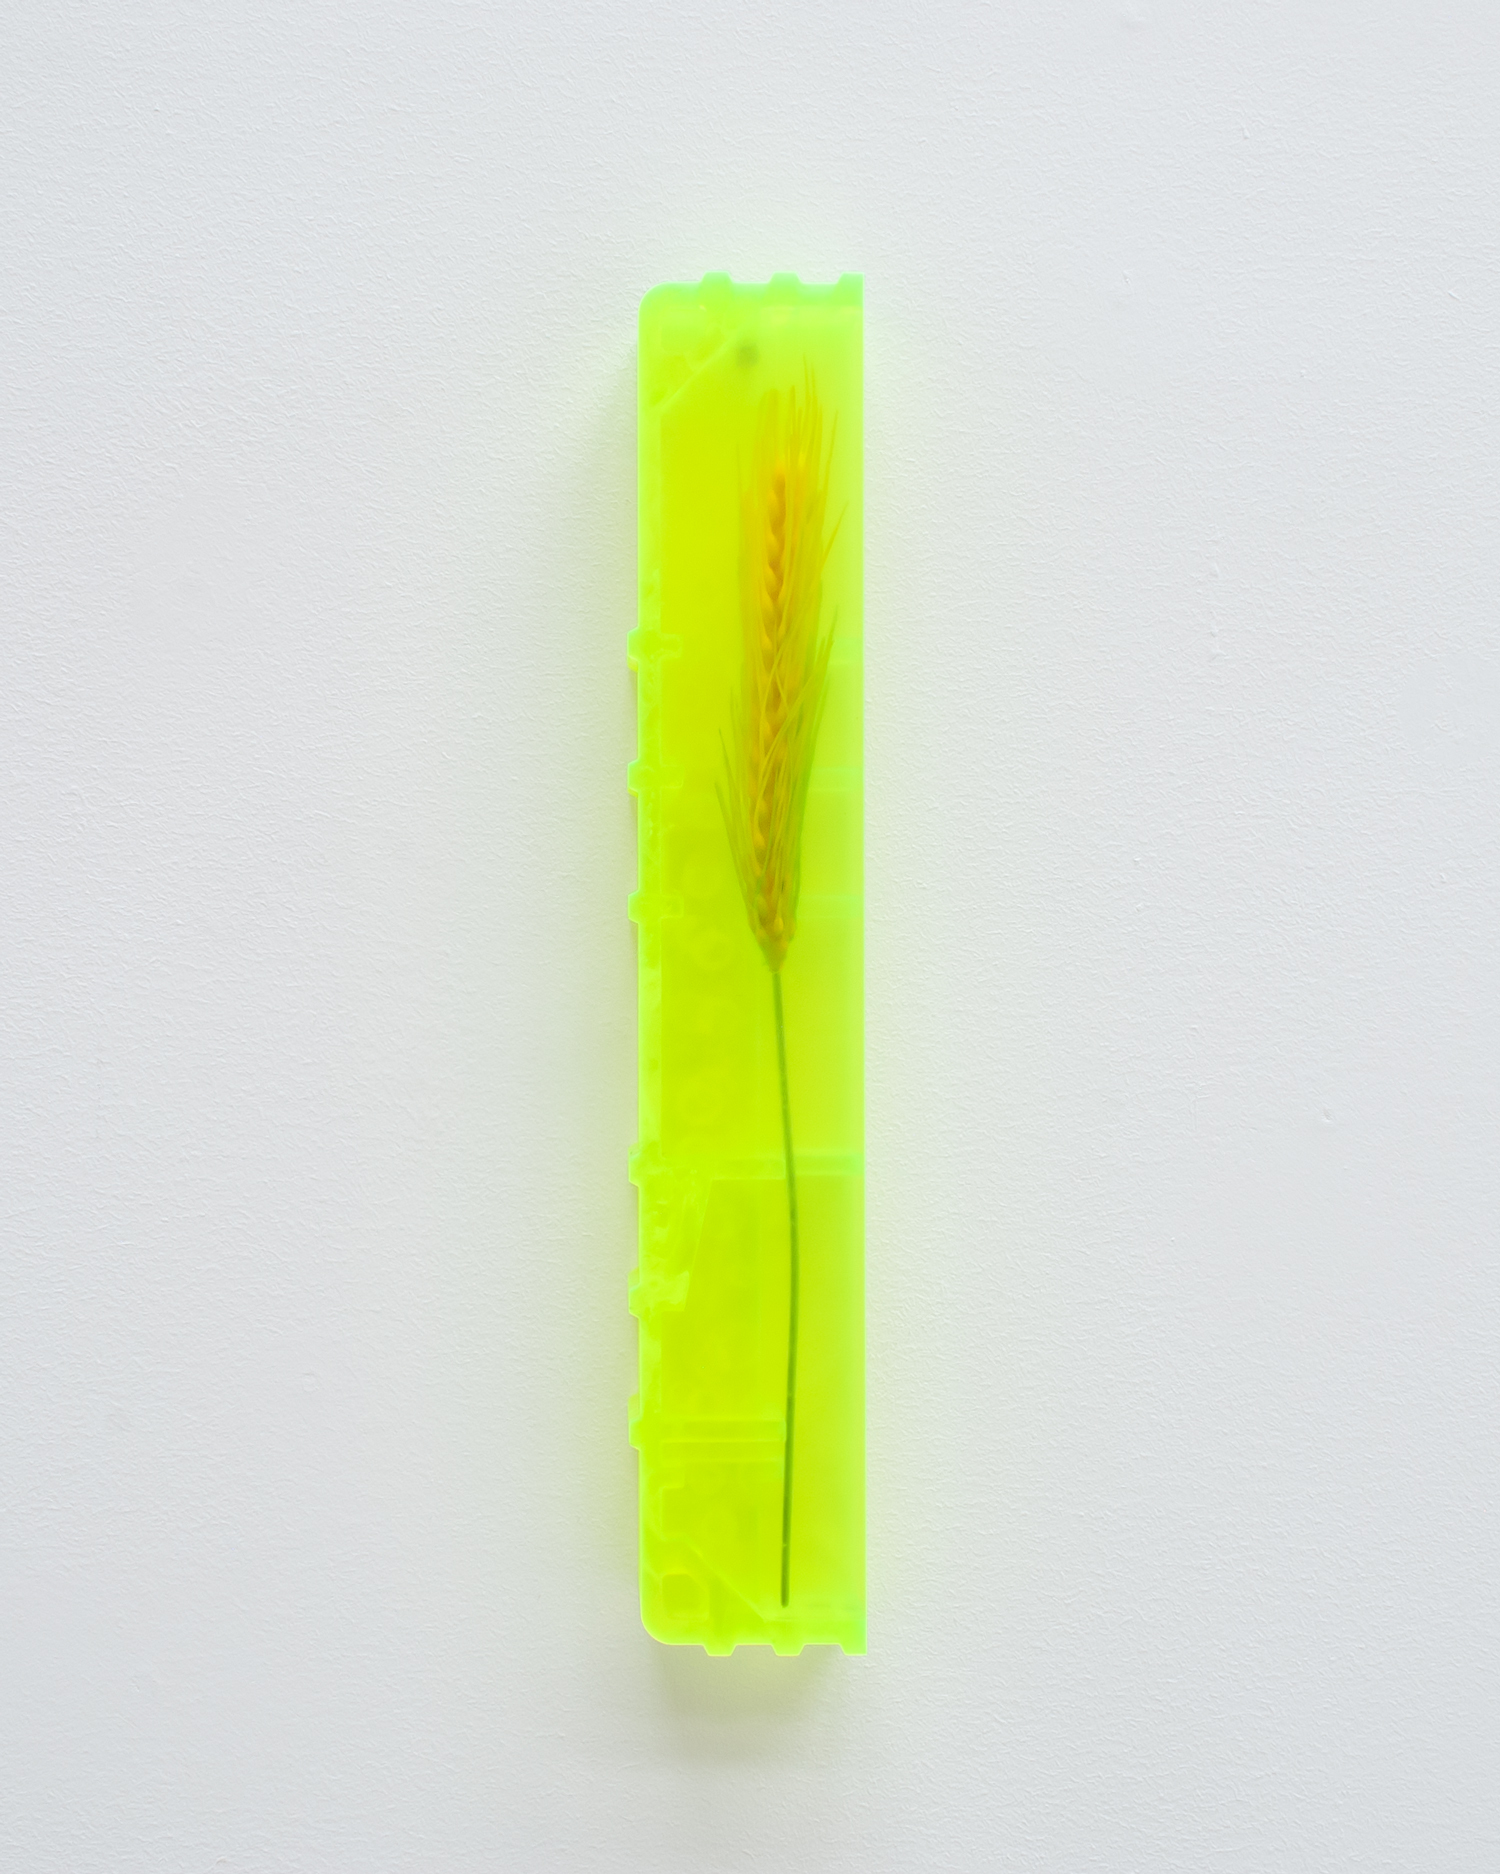 Untitled, 2022, Perspex, artificial wheat 35x6.5x3.5cm